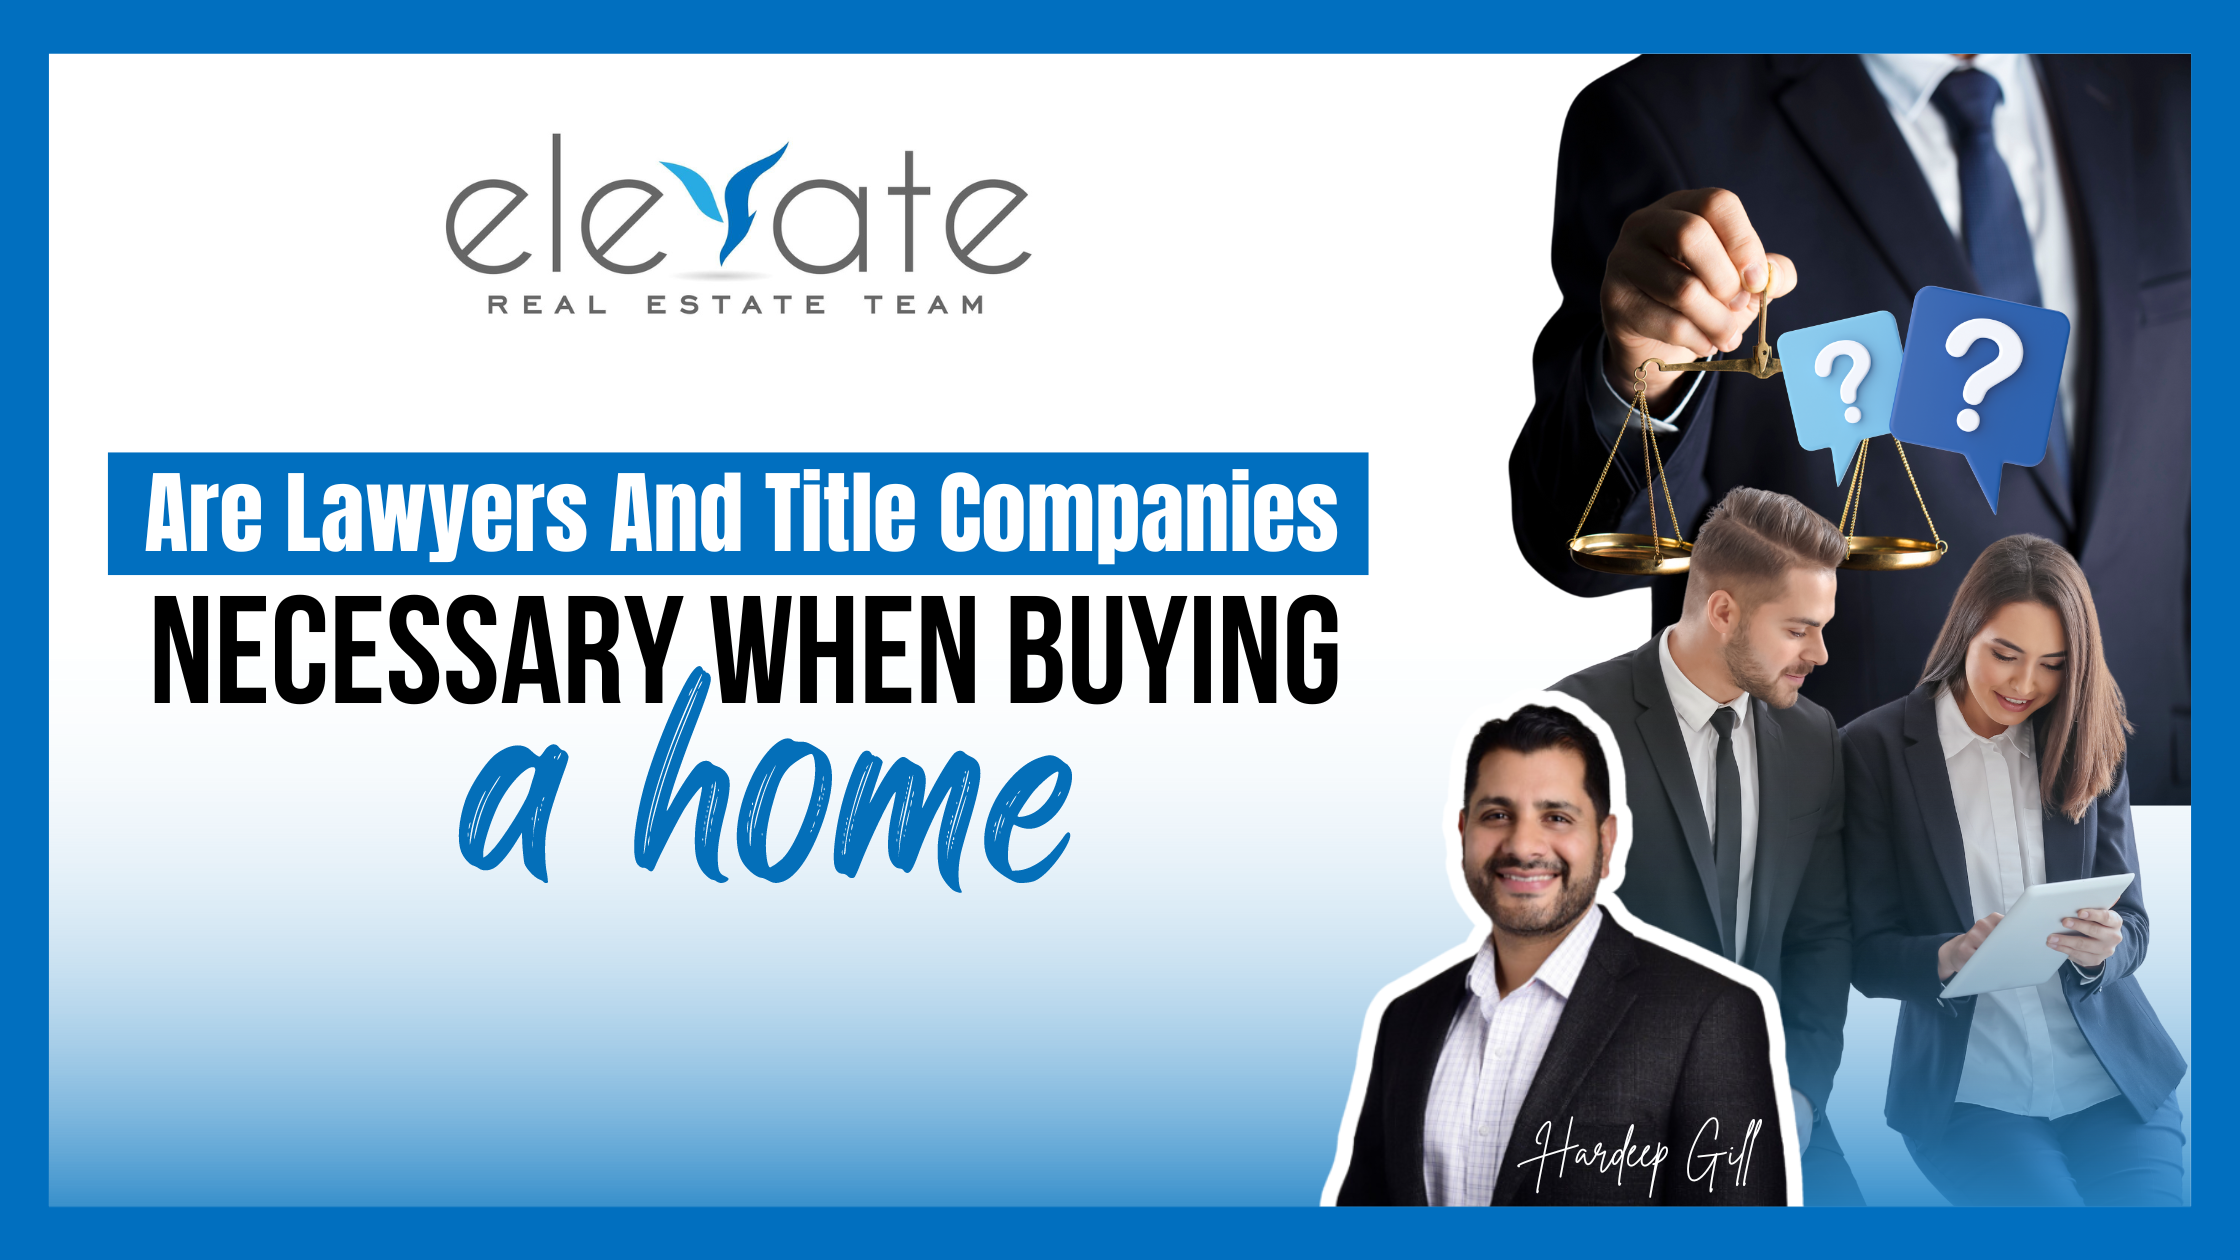 Are Lawyers And Title Companies Necessary When Buying A Home